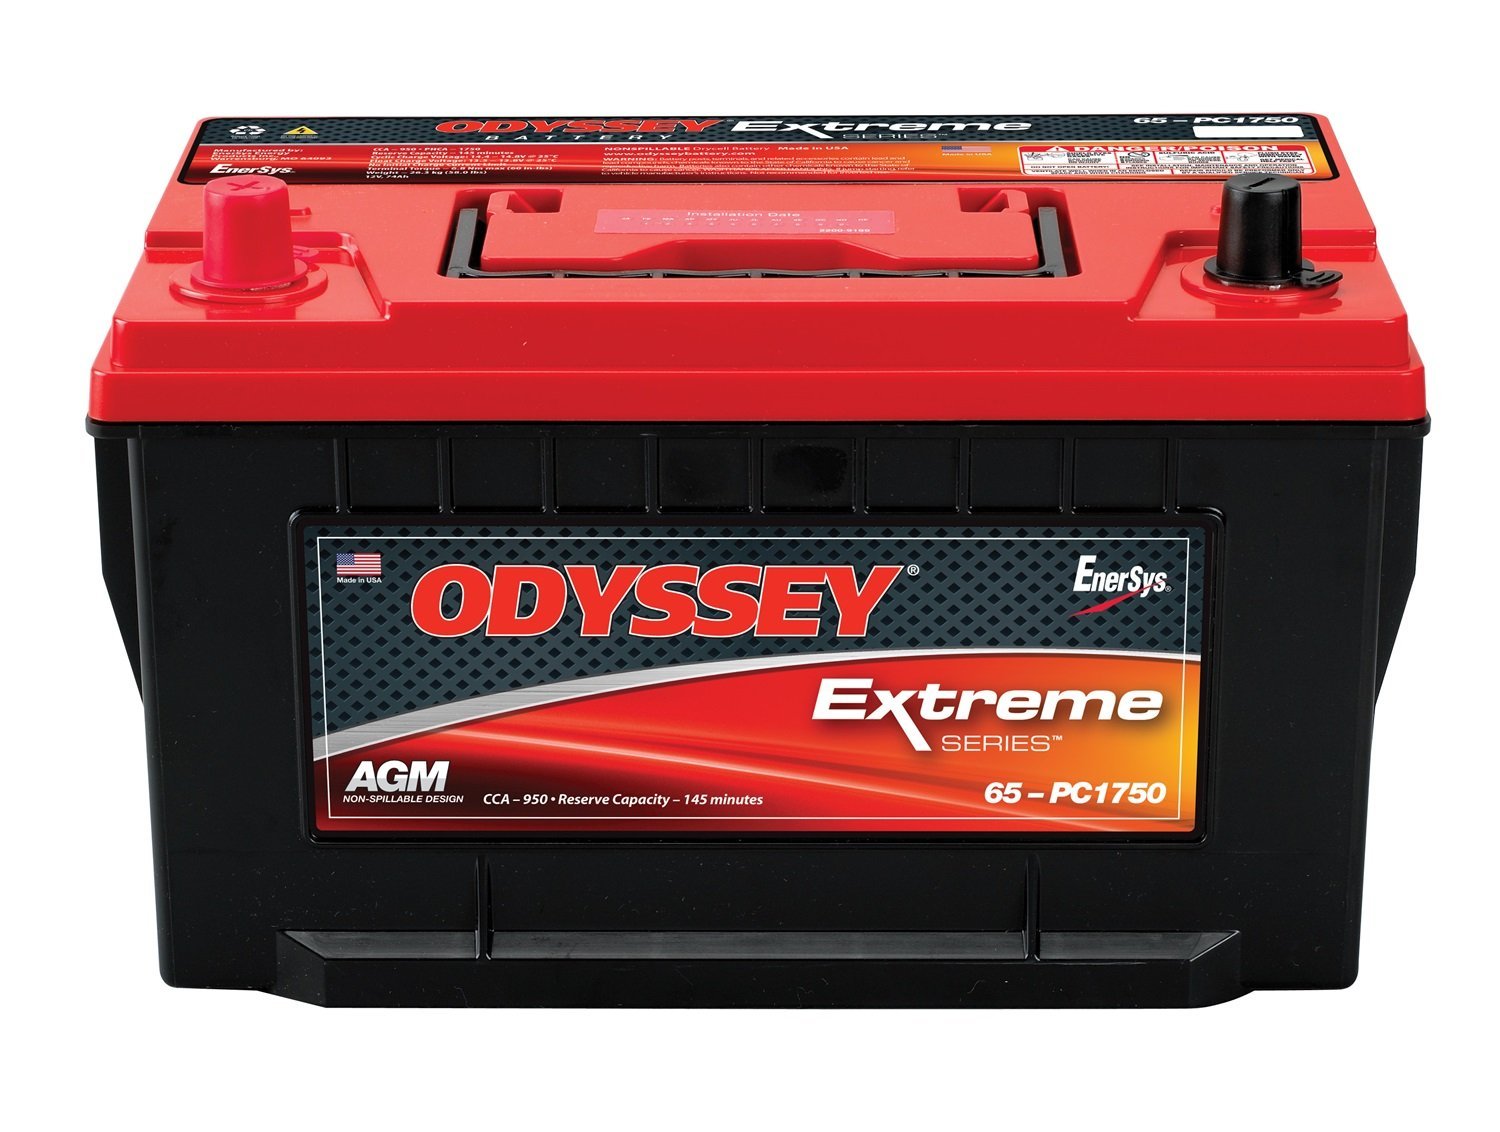 red Odyssey extreme truck battery